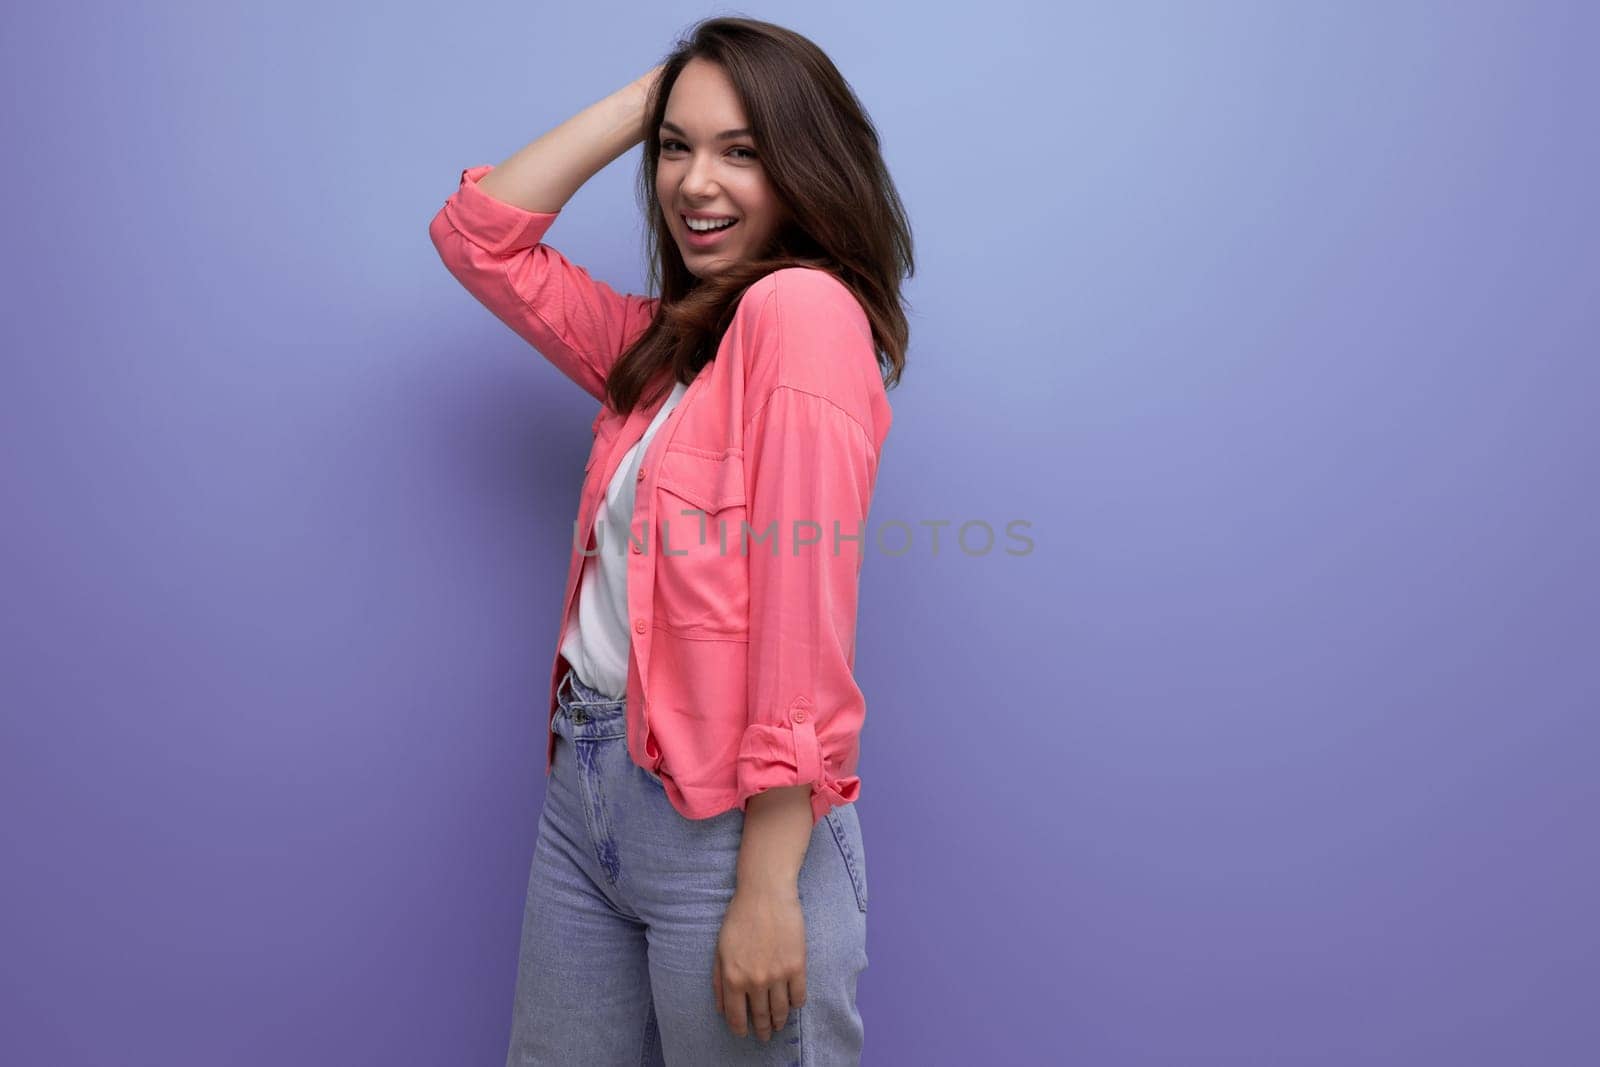 pretty brunette young woman in casual outfit smiling over isolated background.